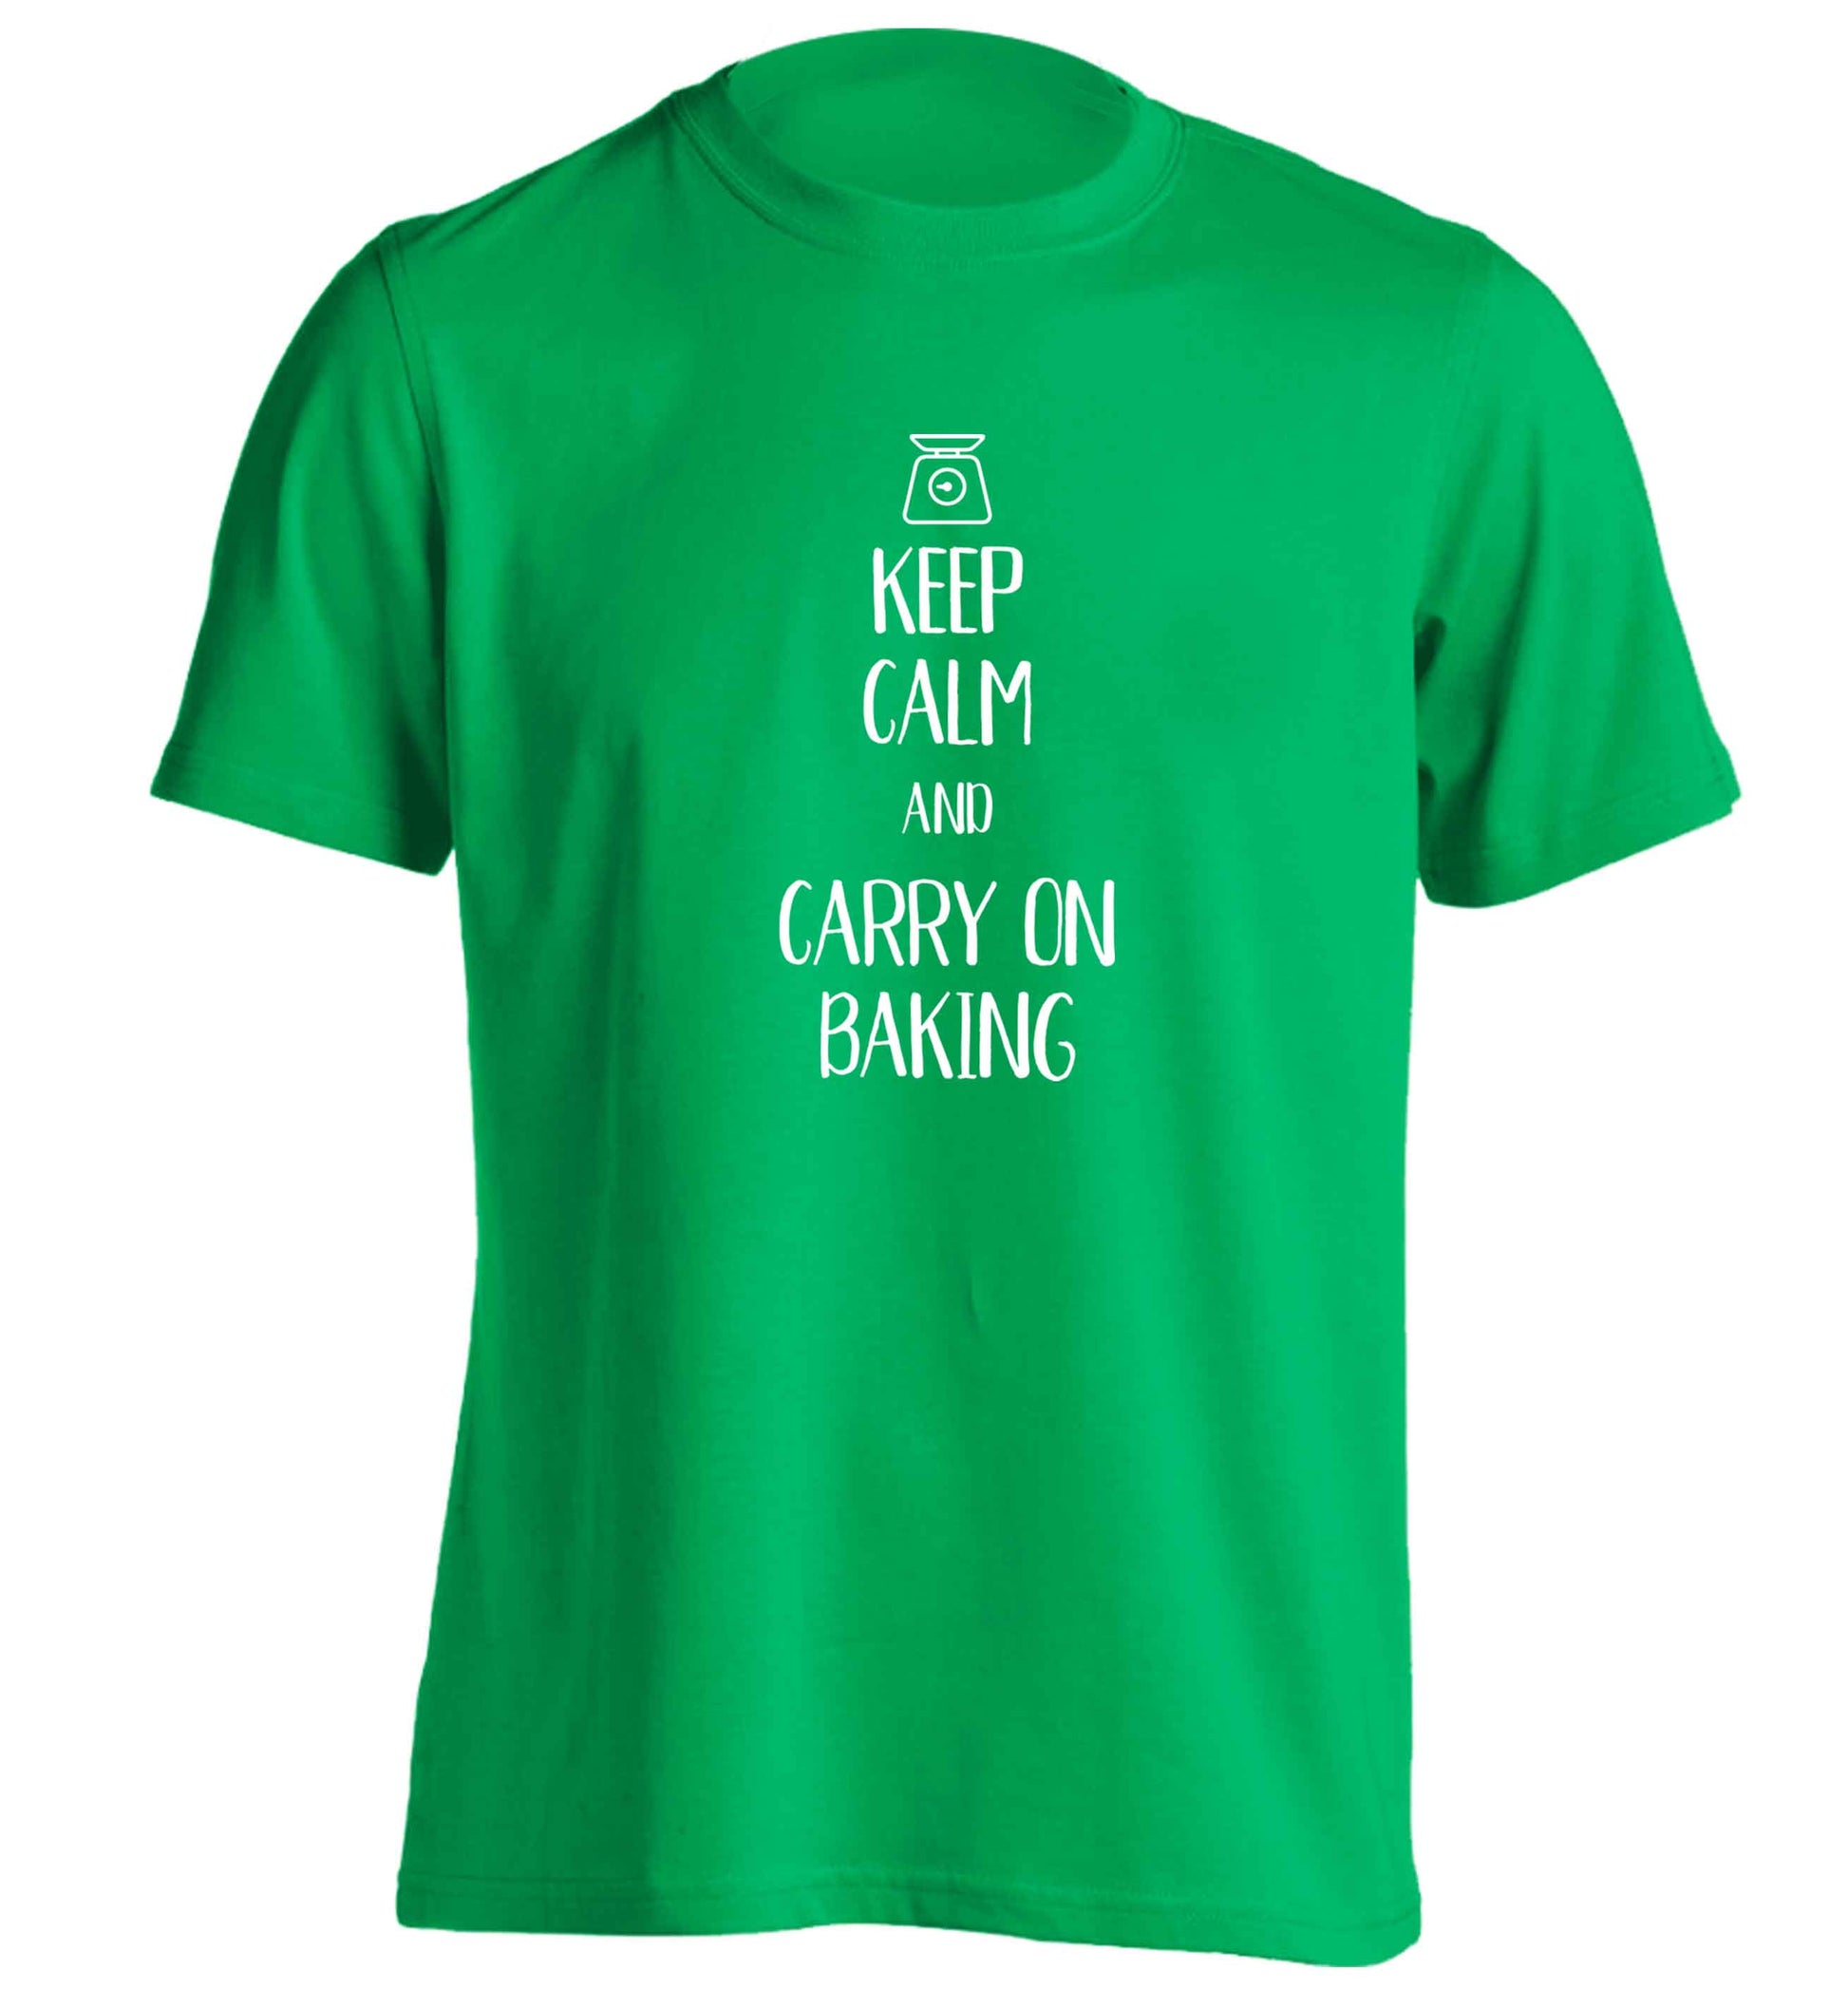 Keep calm and carry on baking adults unisex green Tshirt 2XL